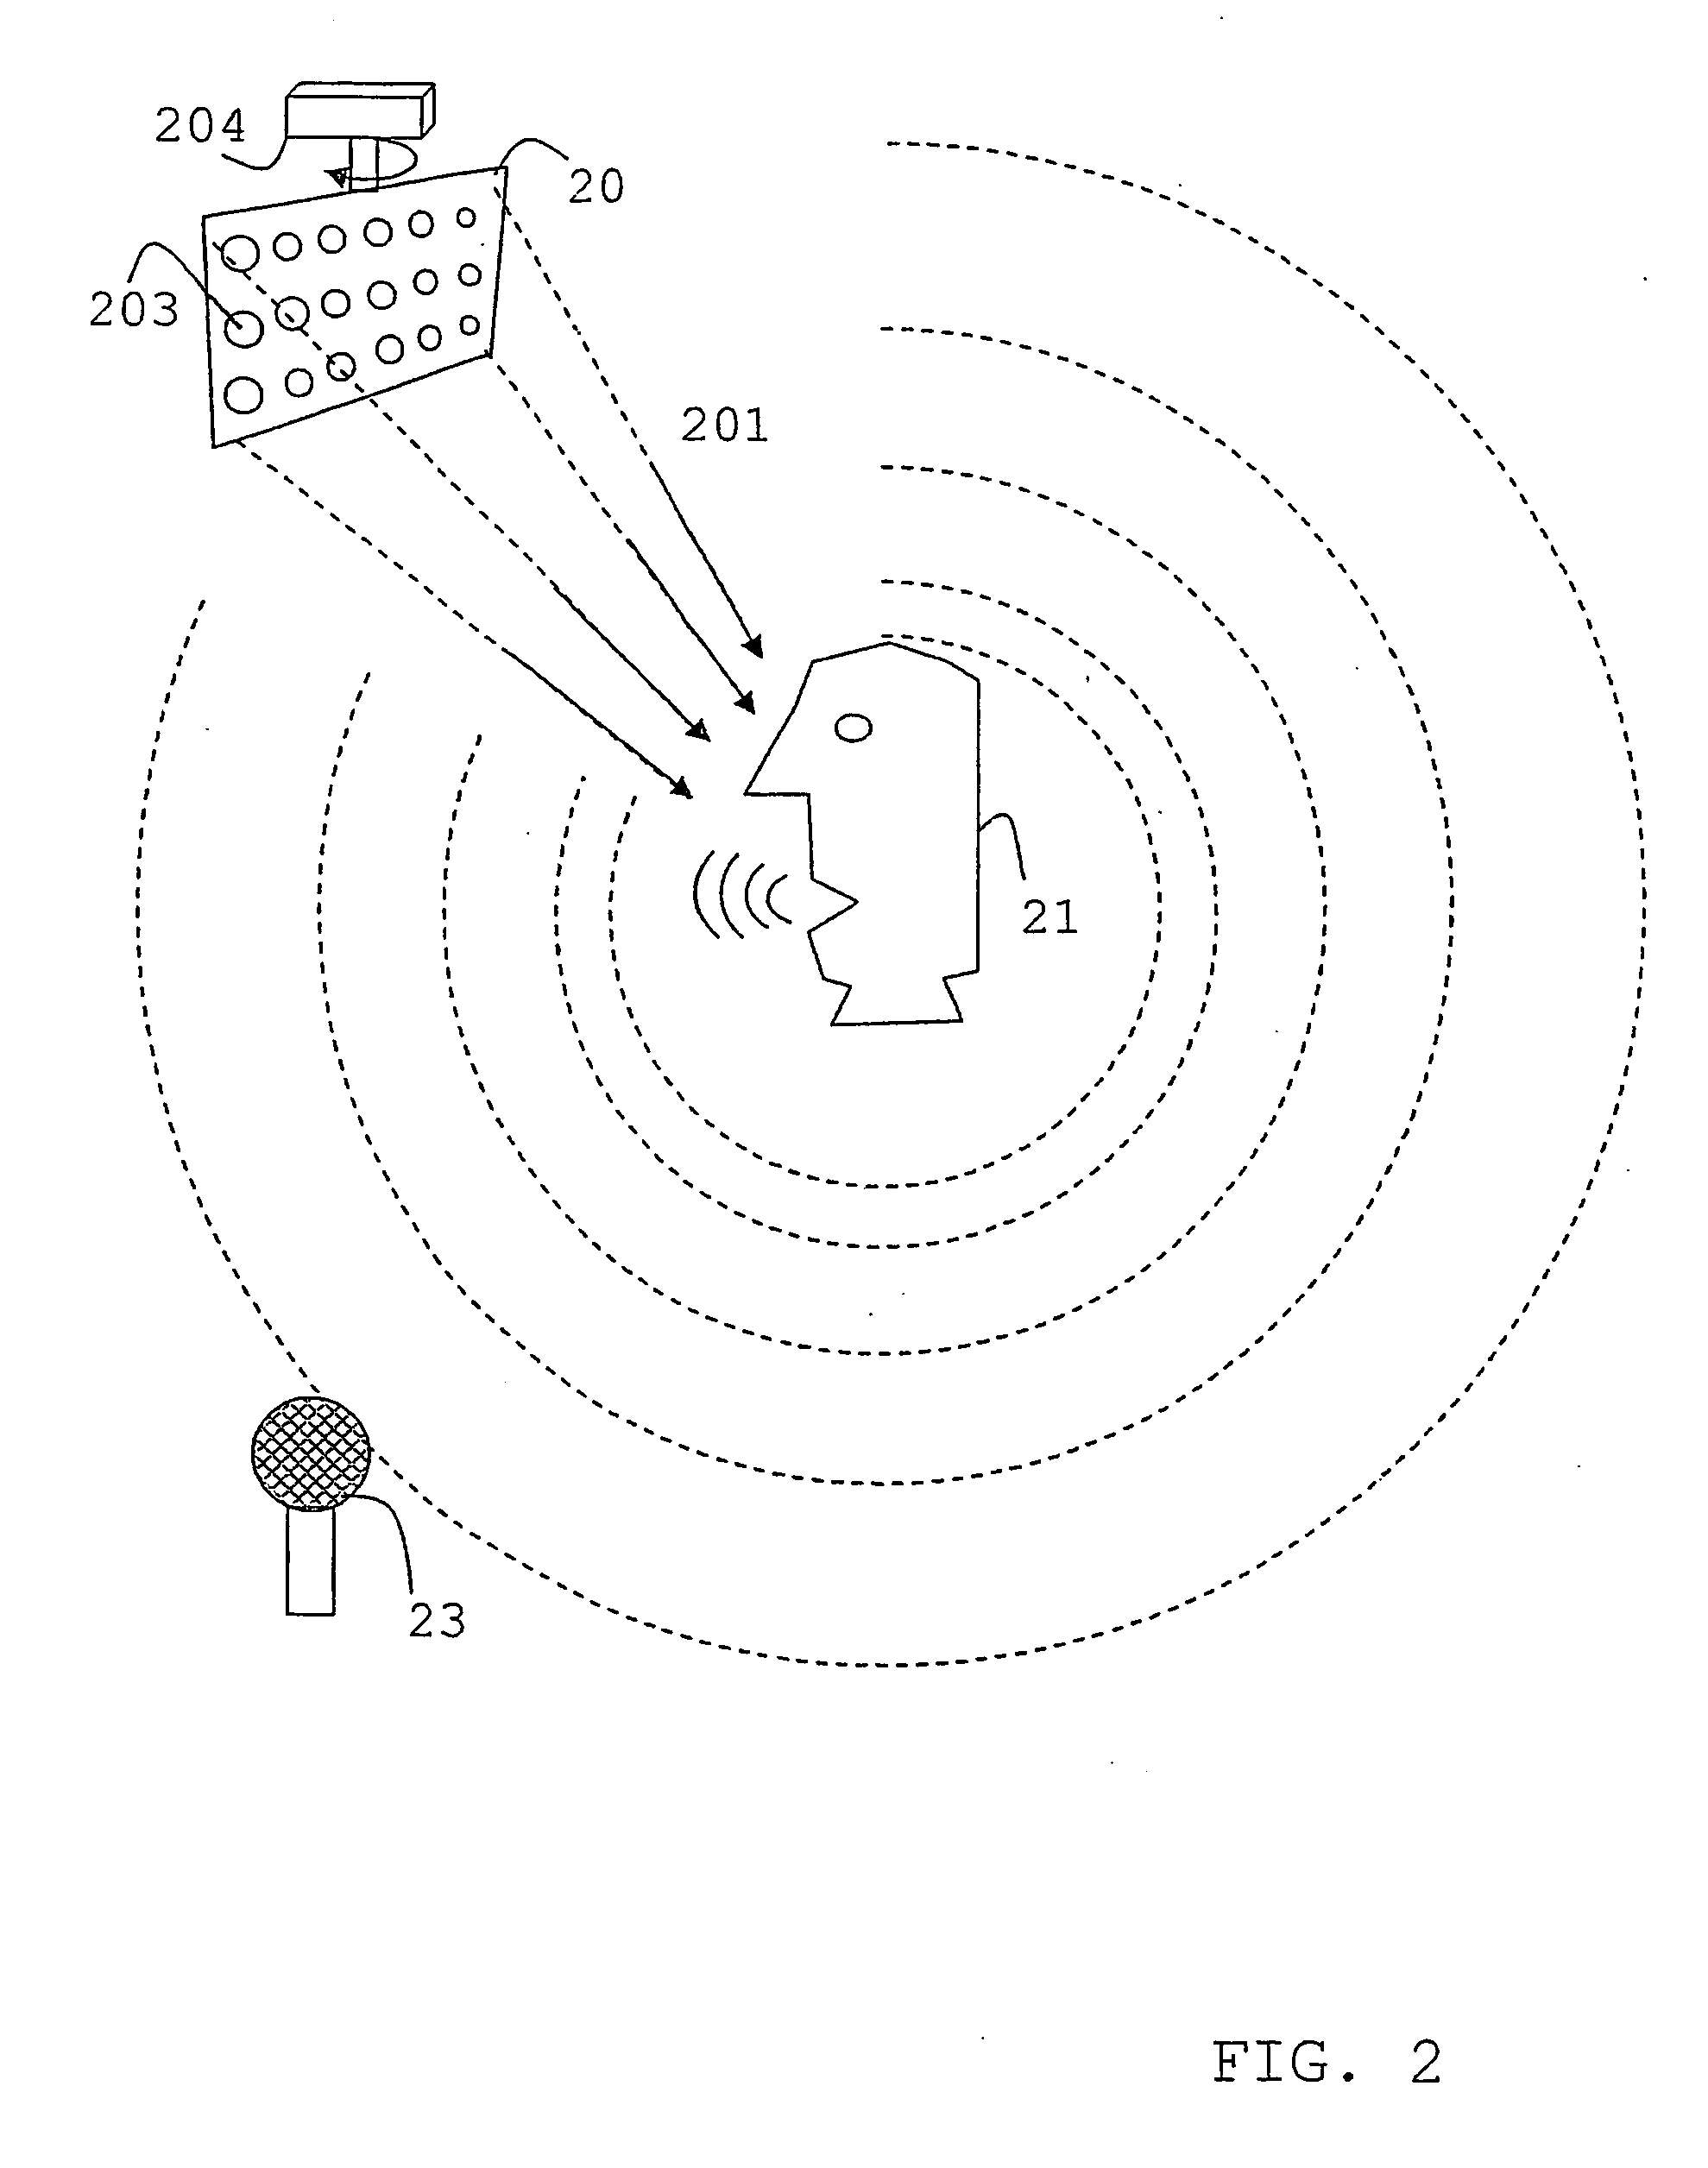 Directional Microphone